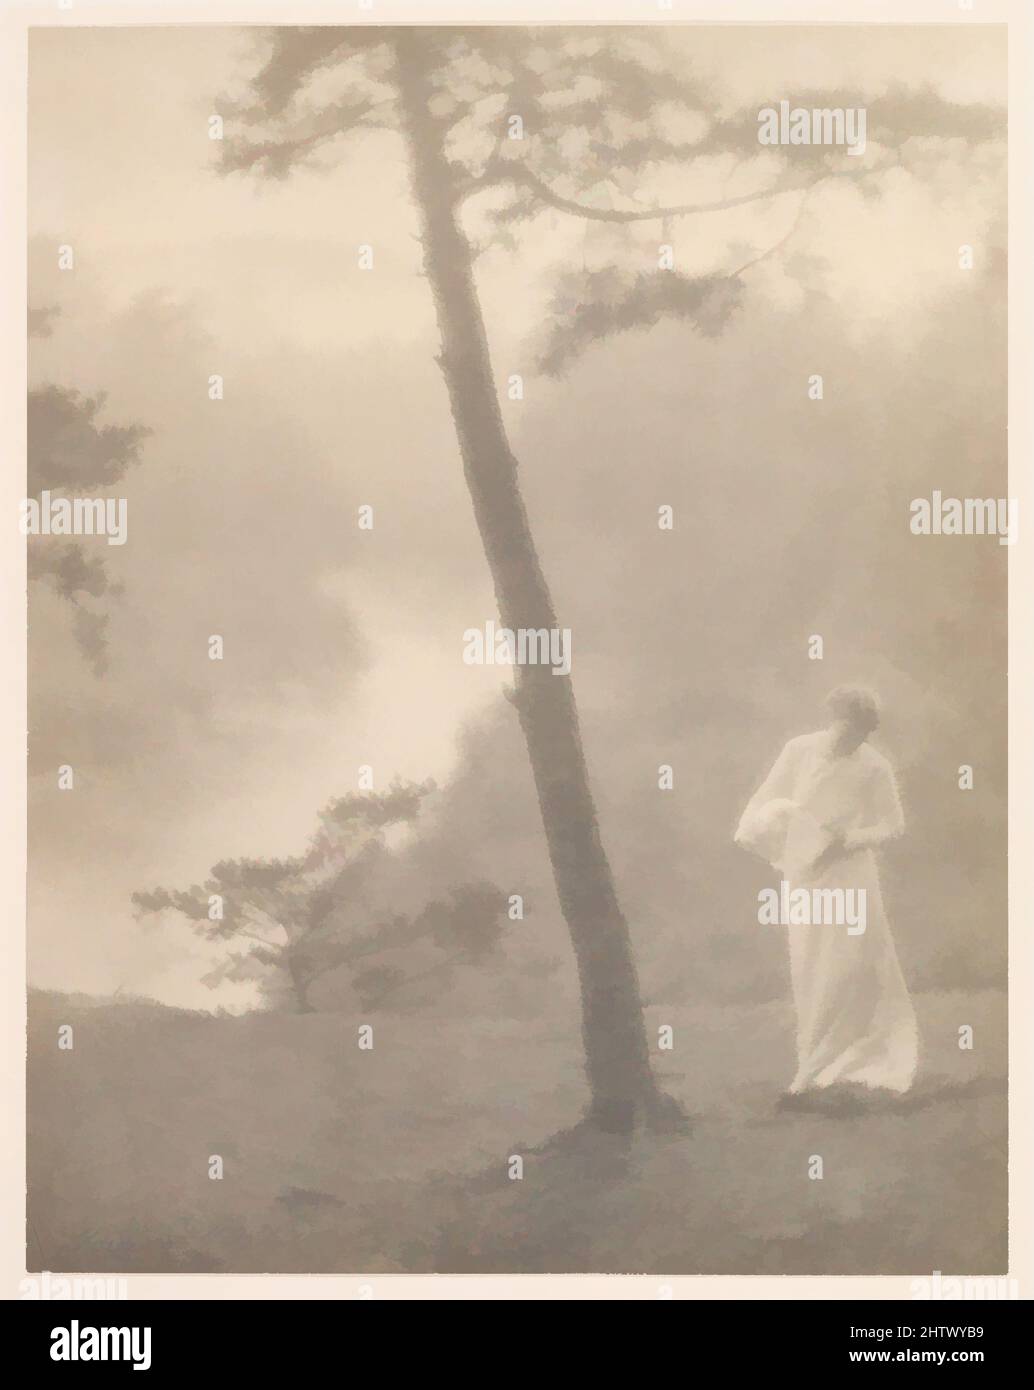 Art inspired by Morning, 1905, Platinum print, 24.1 x 19.1 cm. (9 1/2 x 7 1/2 in.), Photographs, Clarence H. White (American, 1871–1925), Morning perfectly embodies the tenets of Pictorialism: expressive, rather than narrative or documentary, content; craftsmanship in the execution of, Classic works modernized by Artotop with a splash of modernity. Shapes, color and value, eye-catching visual impact on art. Emotions through freedom of artworks in a contemporary way. A timeless message pursuing a wildly creative new direction. Artists turning to the digital medium and creating the Artotop NFT Stock Photo